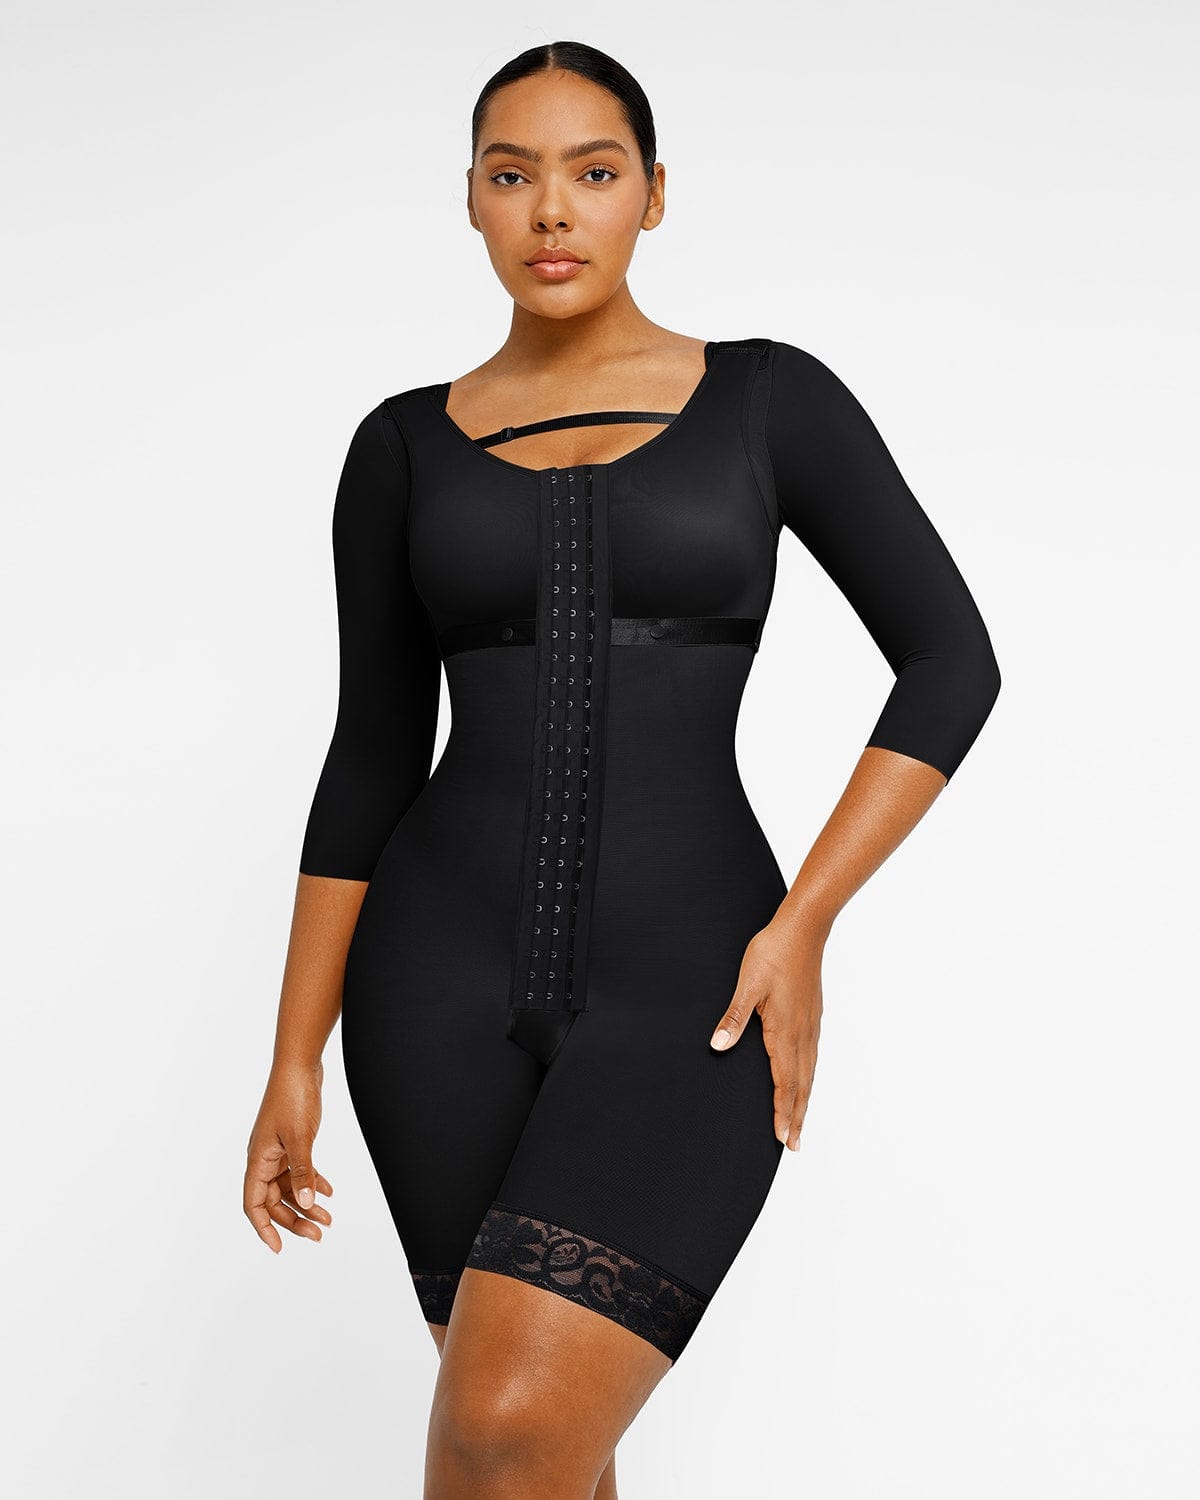 The best body shapers at Shapellx 